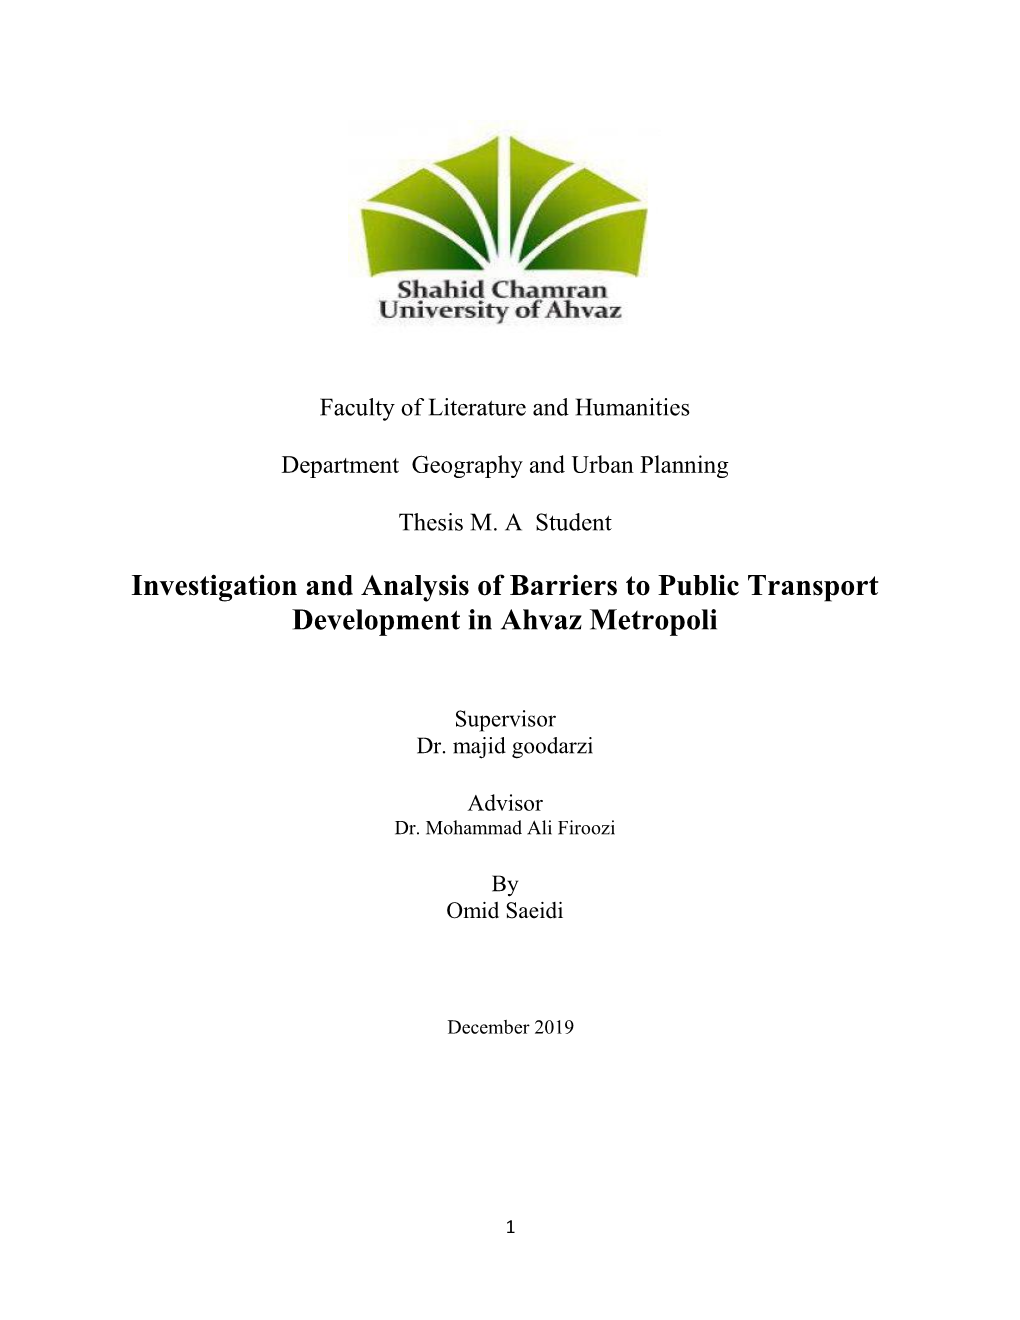 Investigation and Analysis of Barriers to Public Transport Development in Ahvaz Metropoli